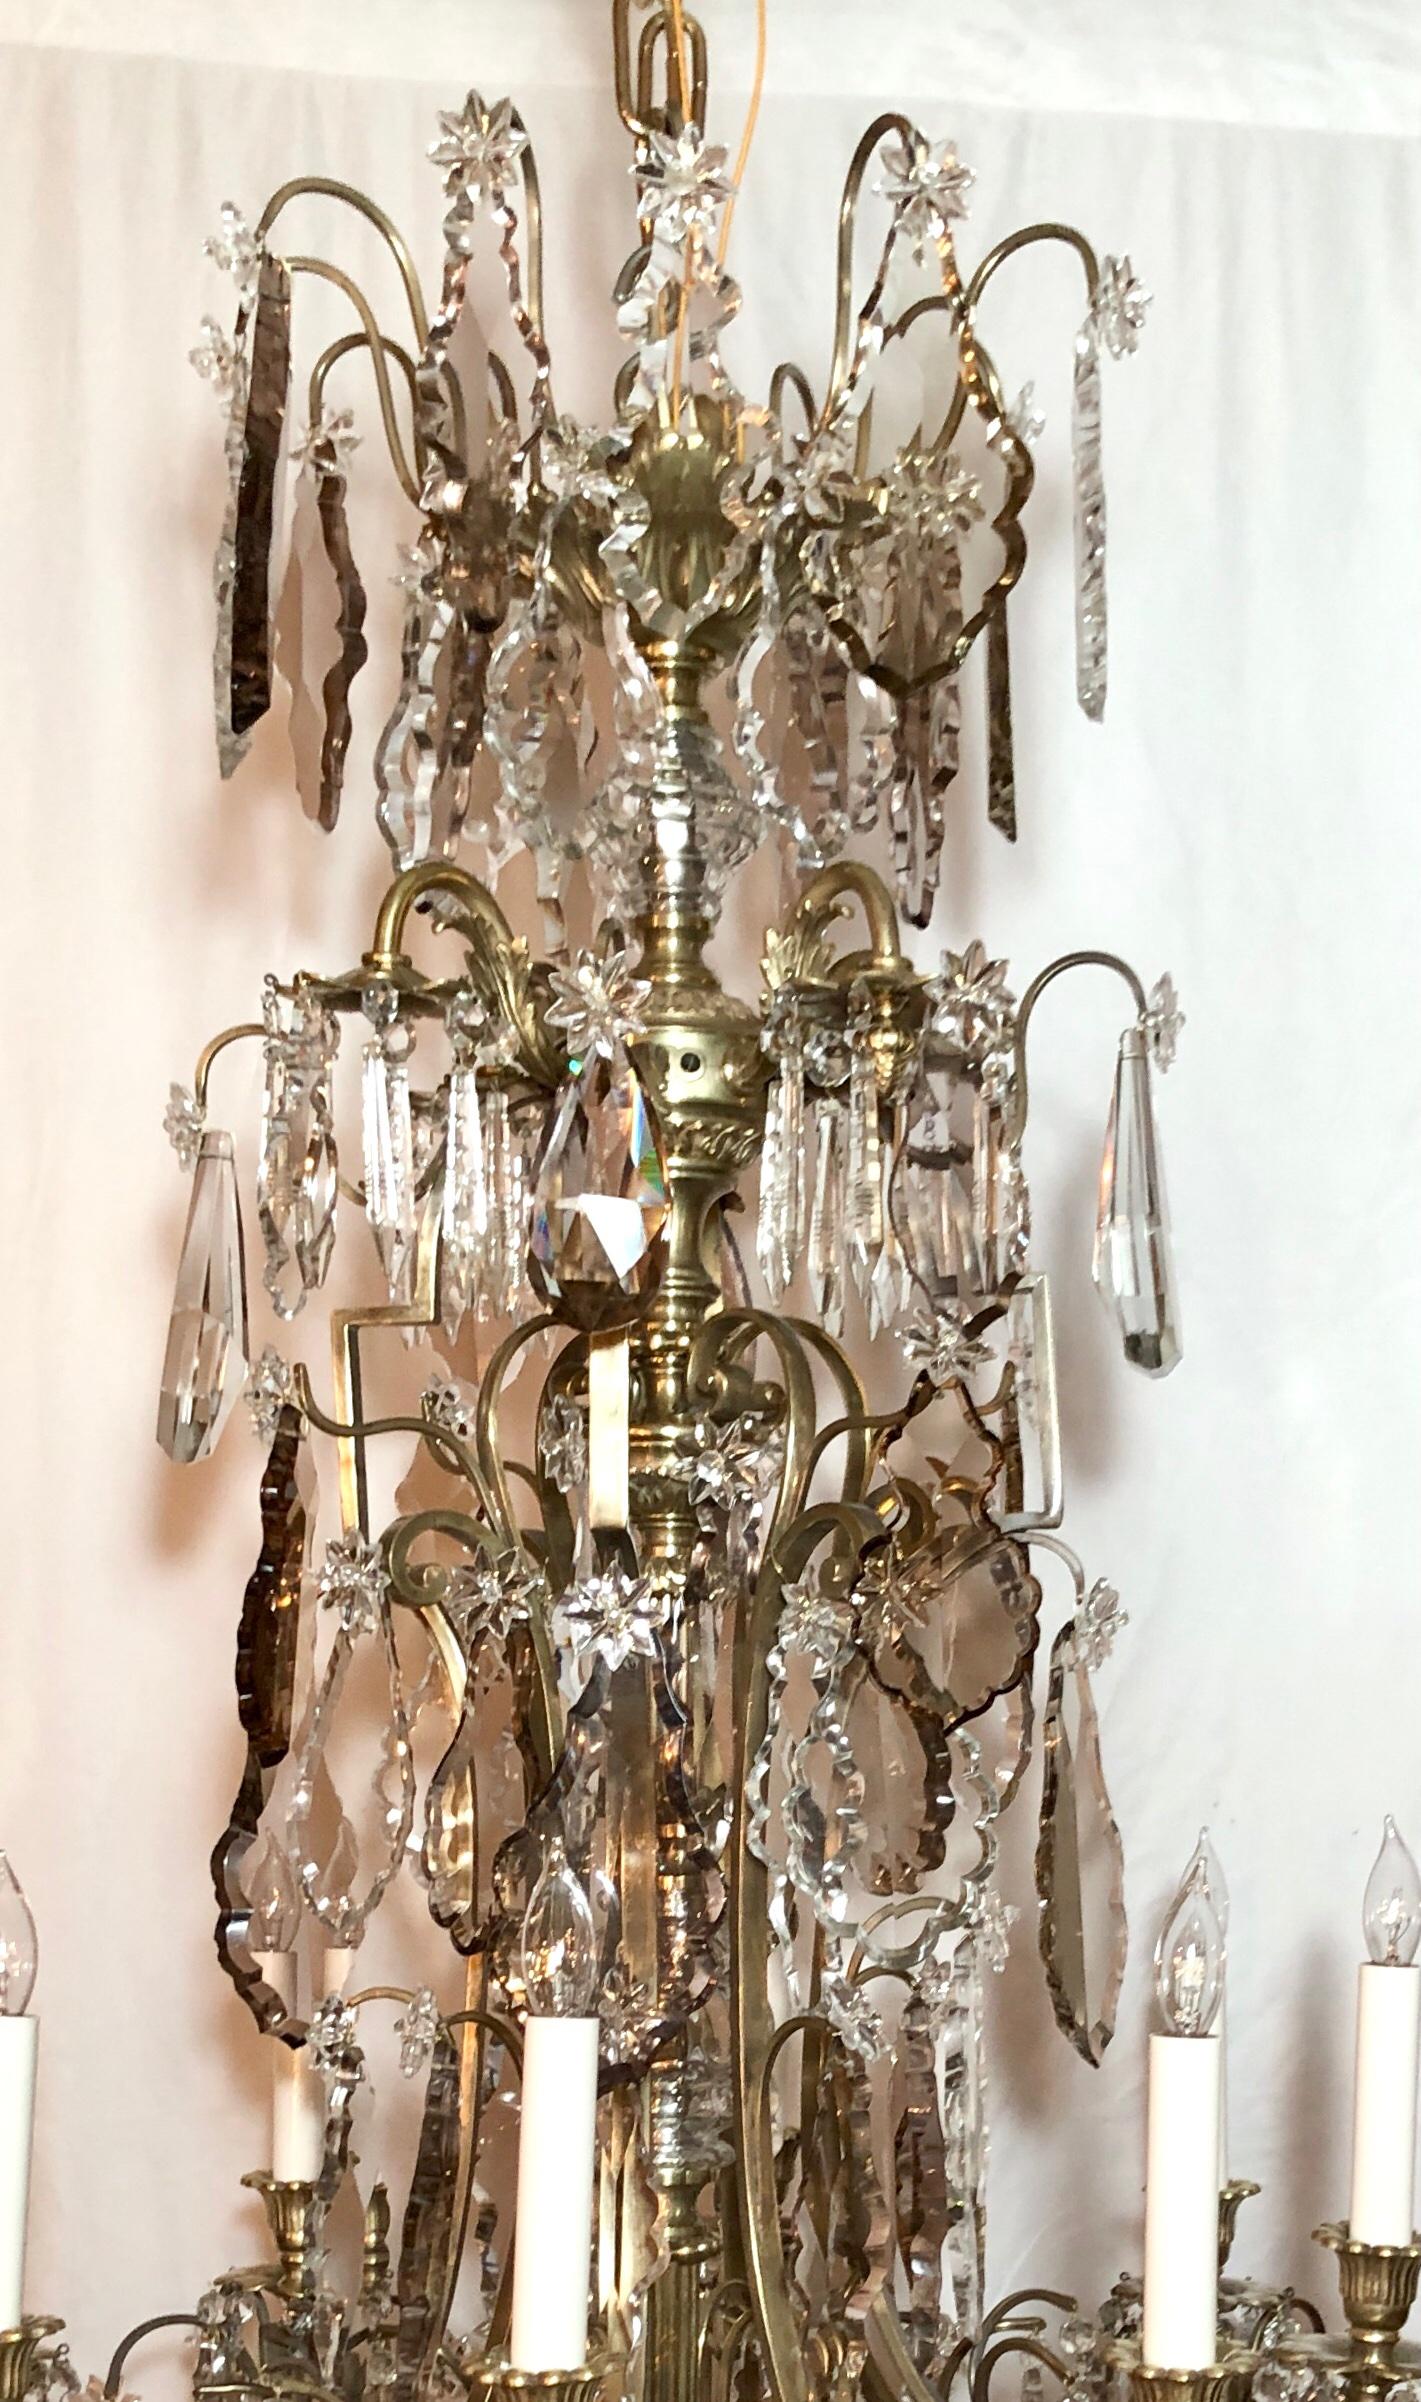 Antique french gold bronze and all original Baccarat crystal richly draped chandelier, Circa 1865-1875.